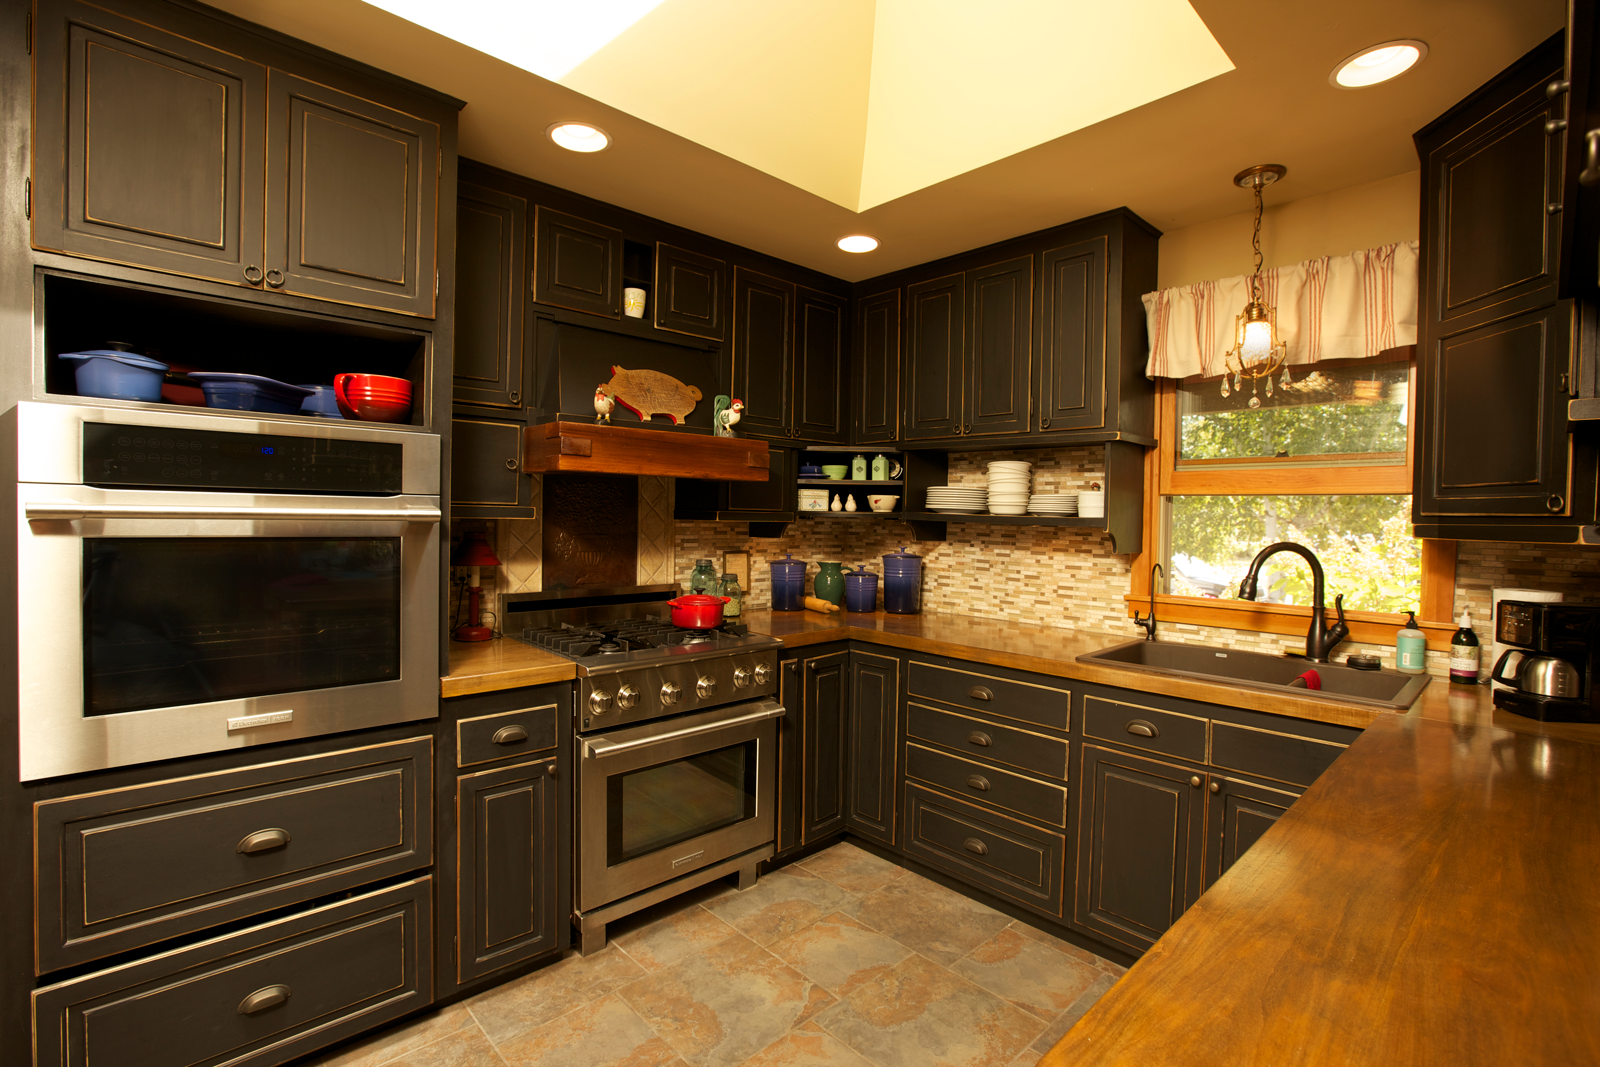 Refinishing Cabinets Vs Replacing Get Your Dream Kitchen Elite